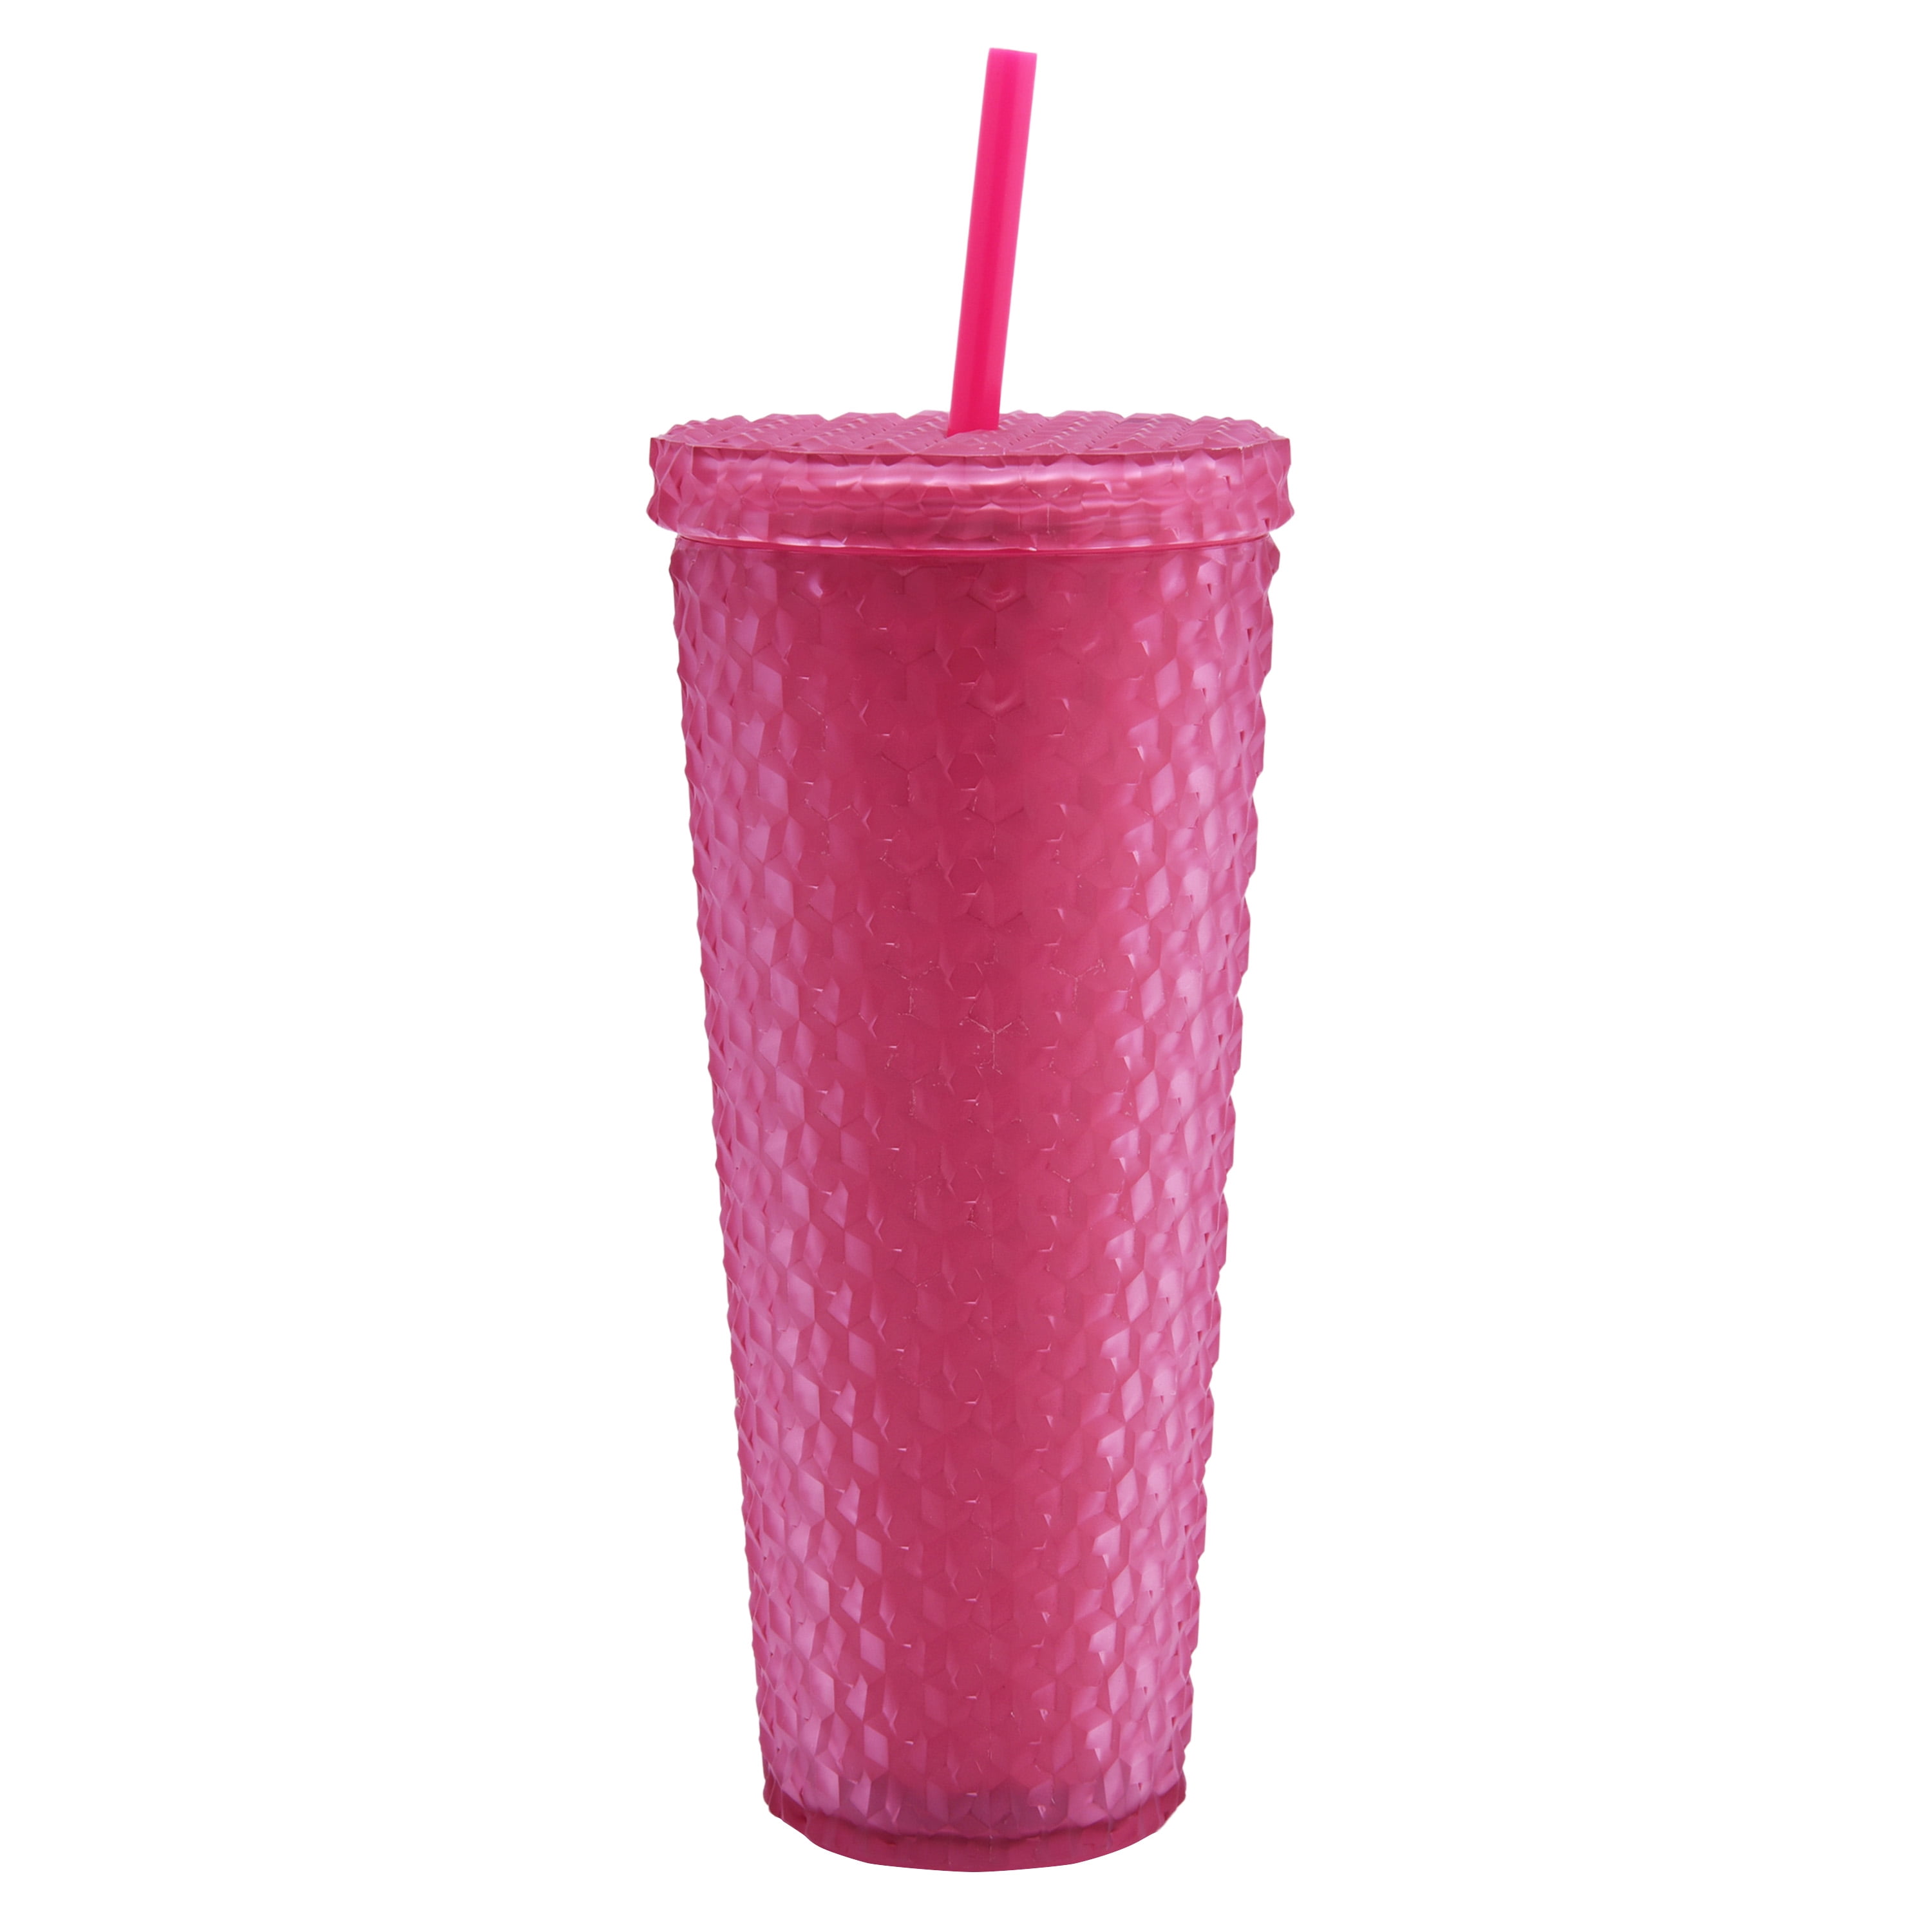 Montana Girl Stainless Steel Tumbler w/Handle in Pink – The